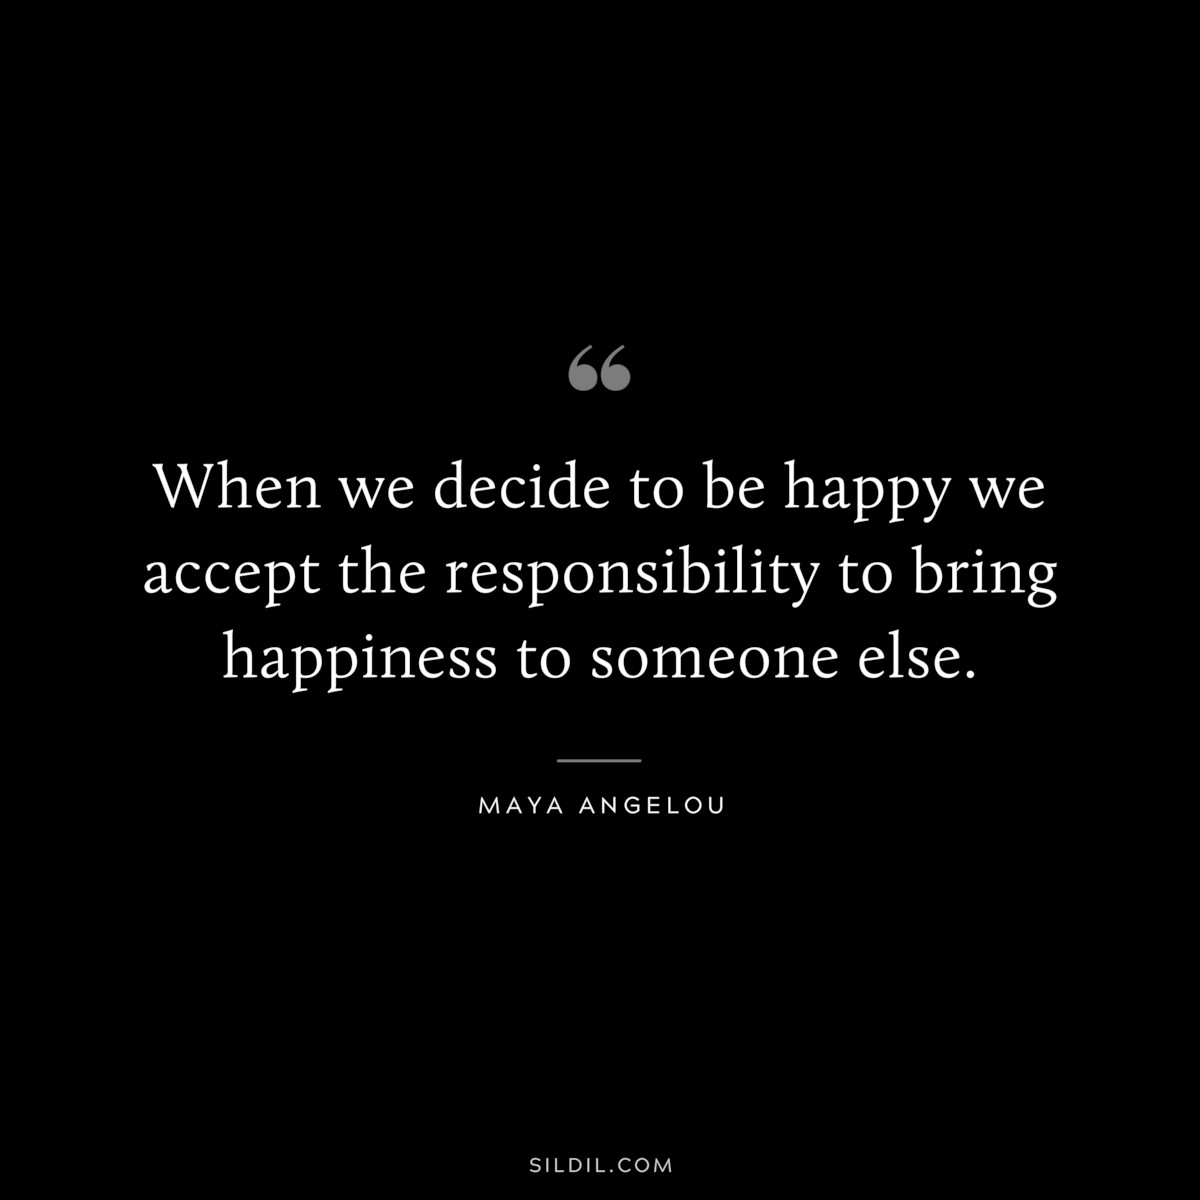 When we decide to be happy we accept the responsibility to bring happiness to someone else. ― Maya Angelou